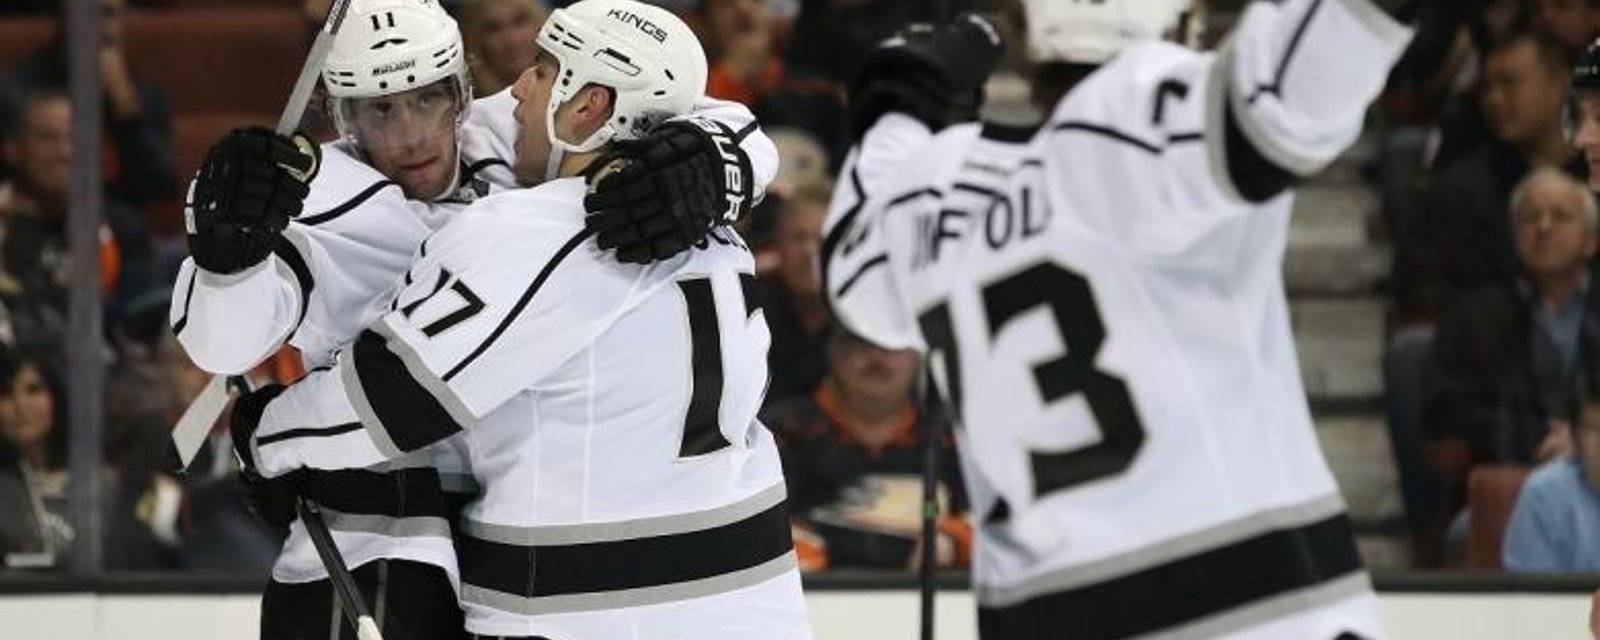 Rumor: After success with Kopitar, Kings looking to get another big deal done.